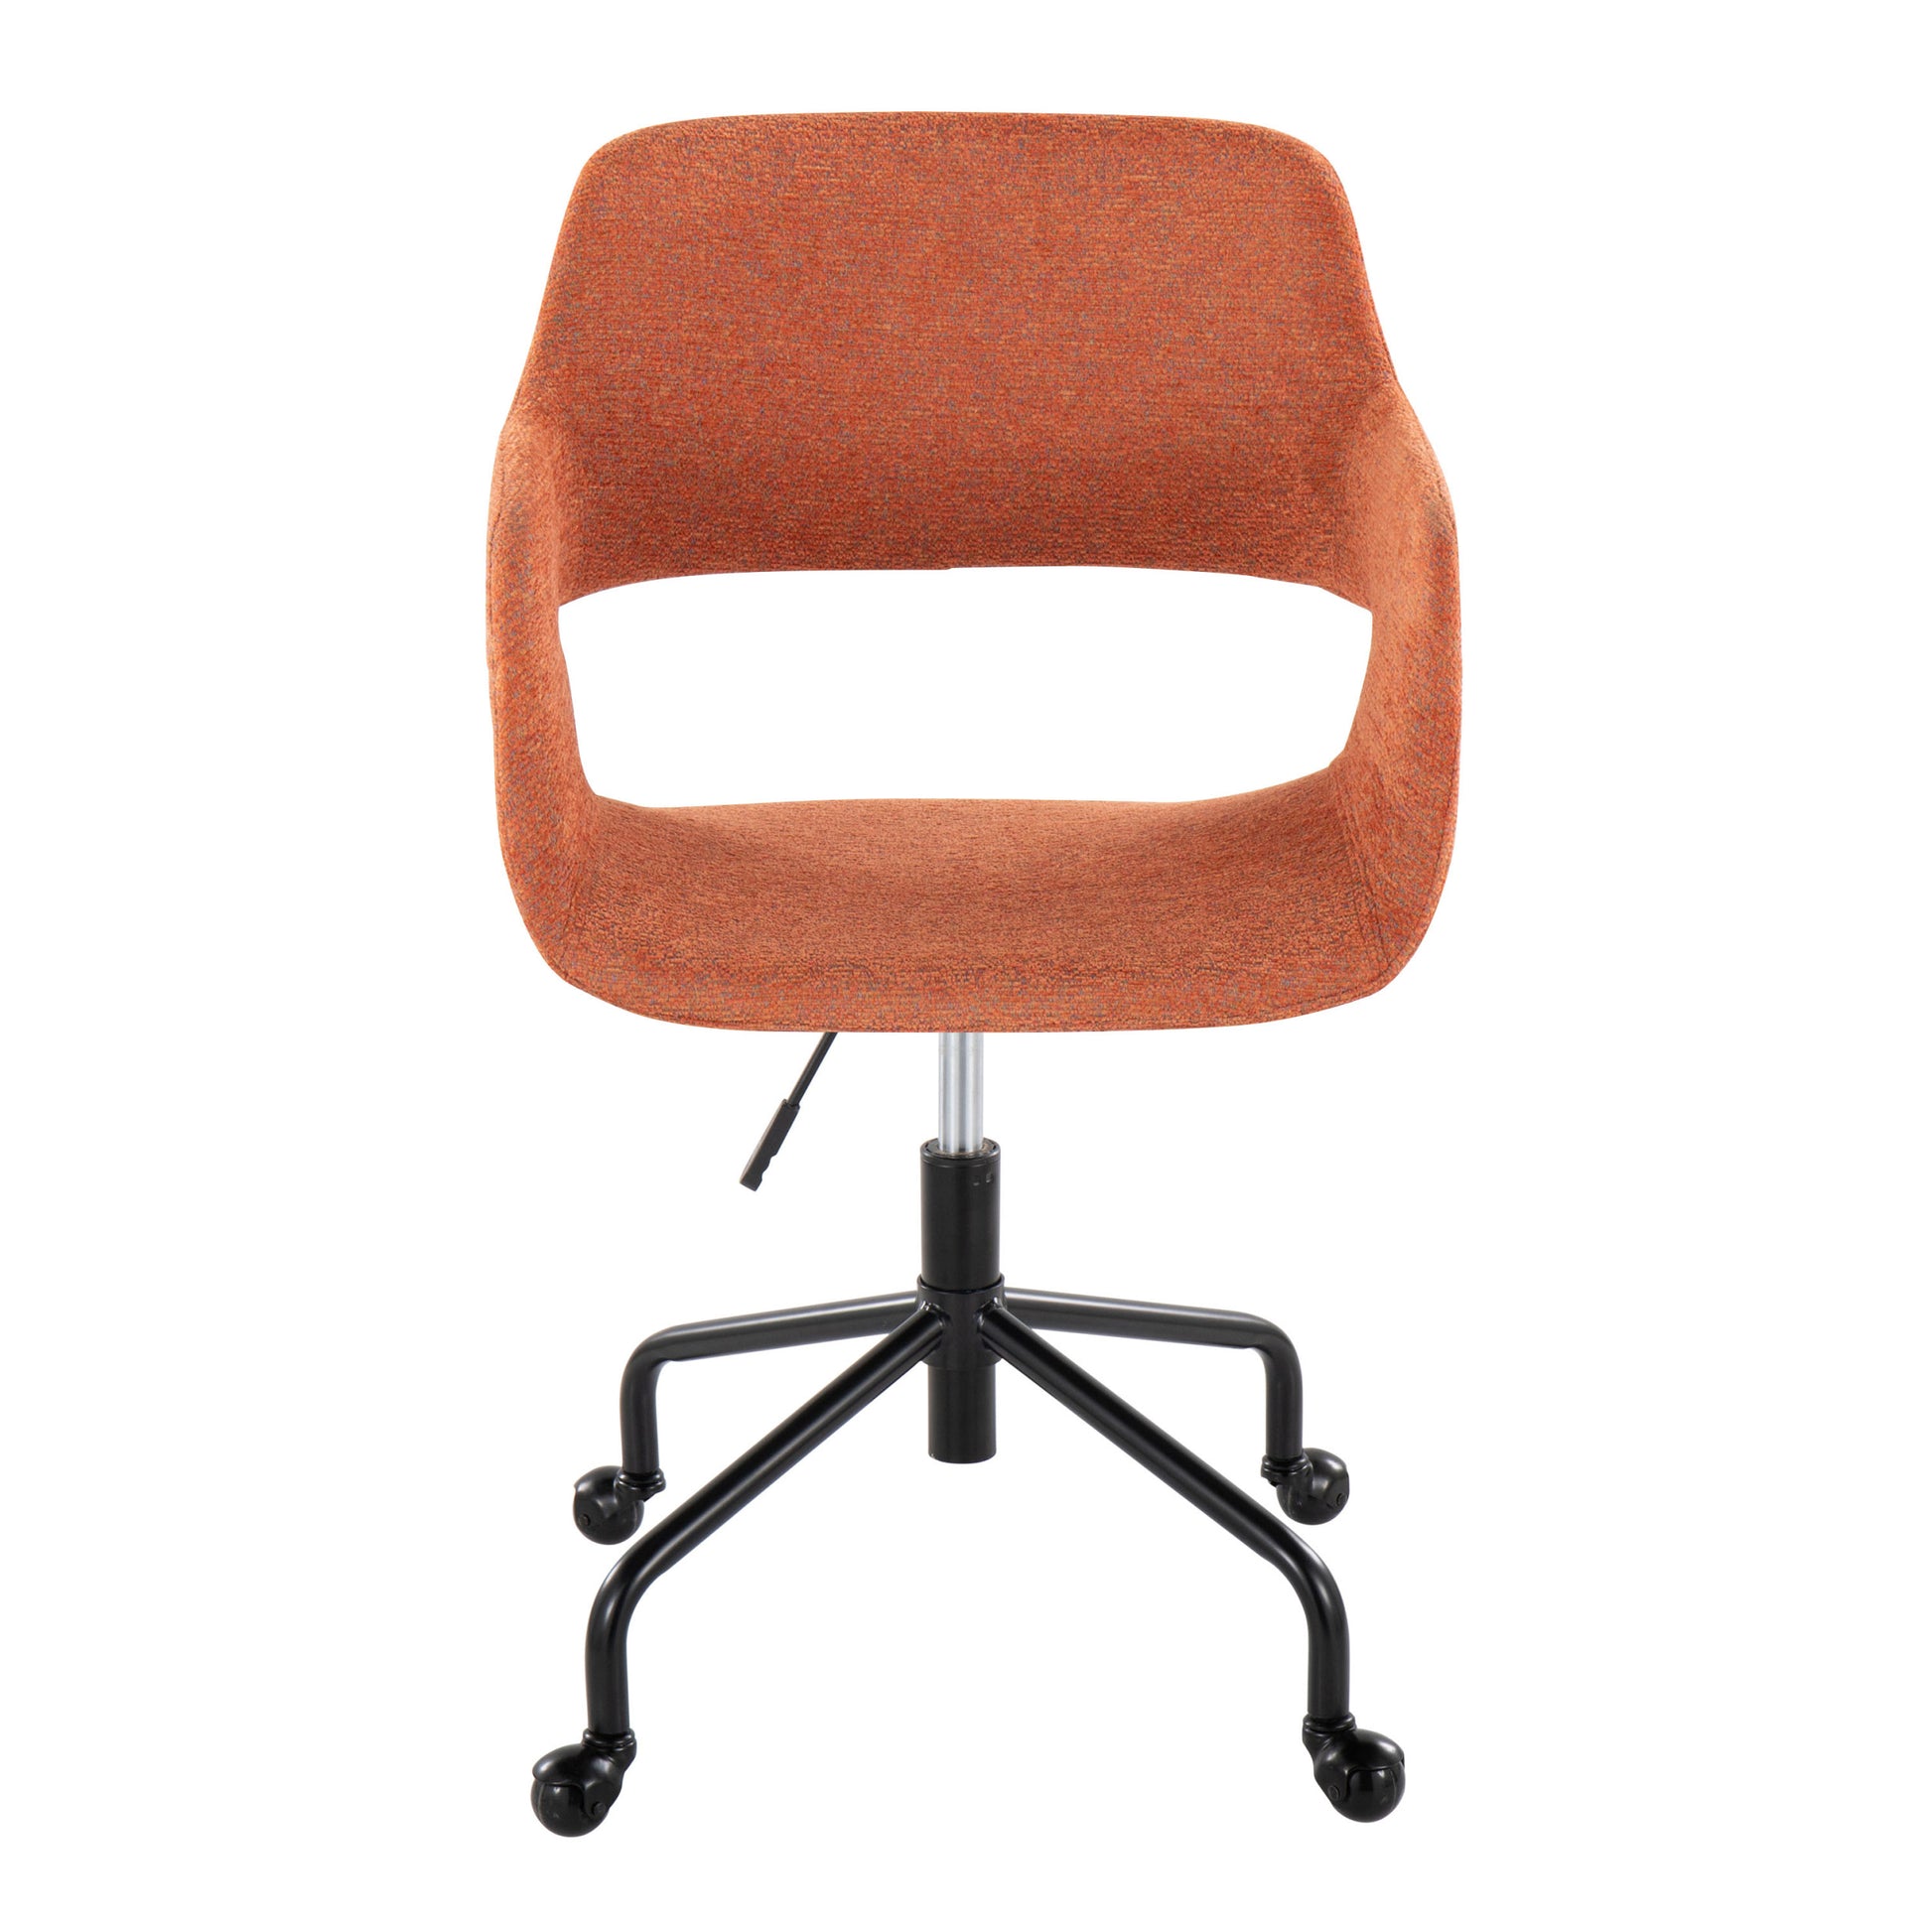 Margarite Contemporary Adjustable Office Chair in orange-fabric